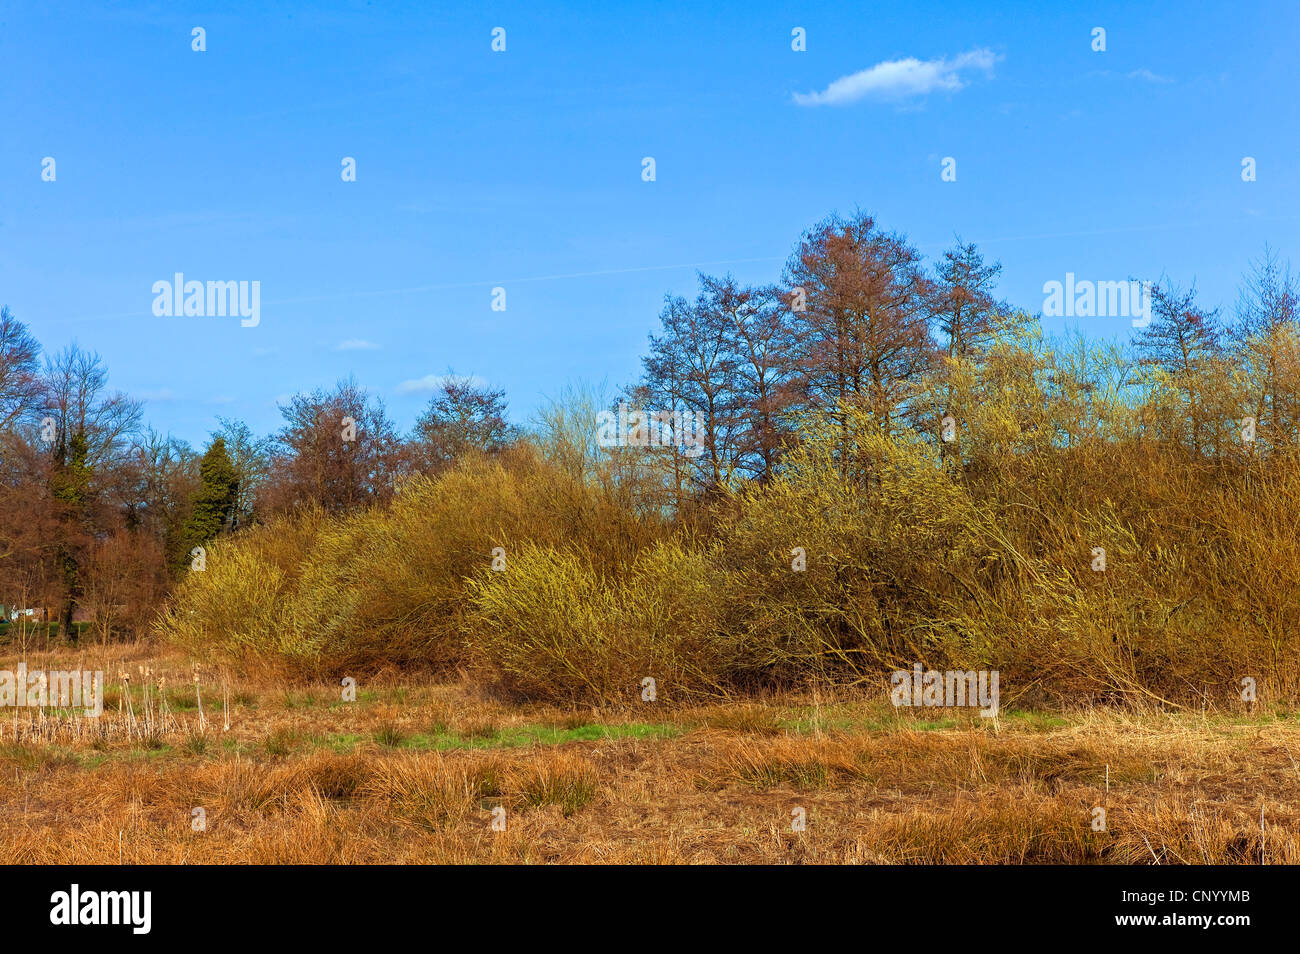 European grey willow (Salix cinerea), blooming willows in a wetland, Germany, Lower Saxony Stock Photo